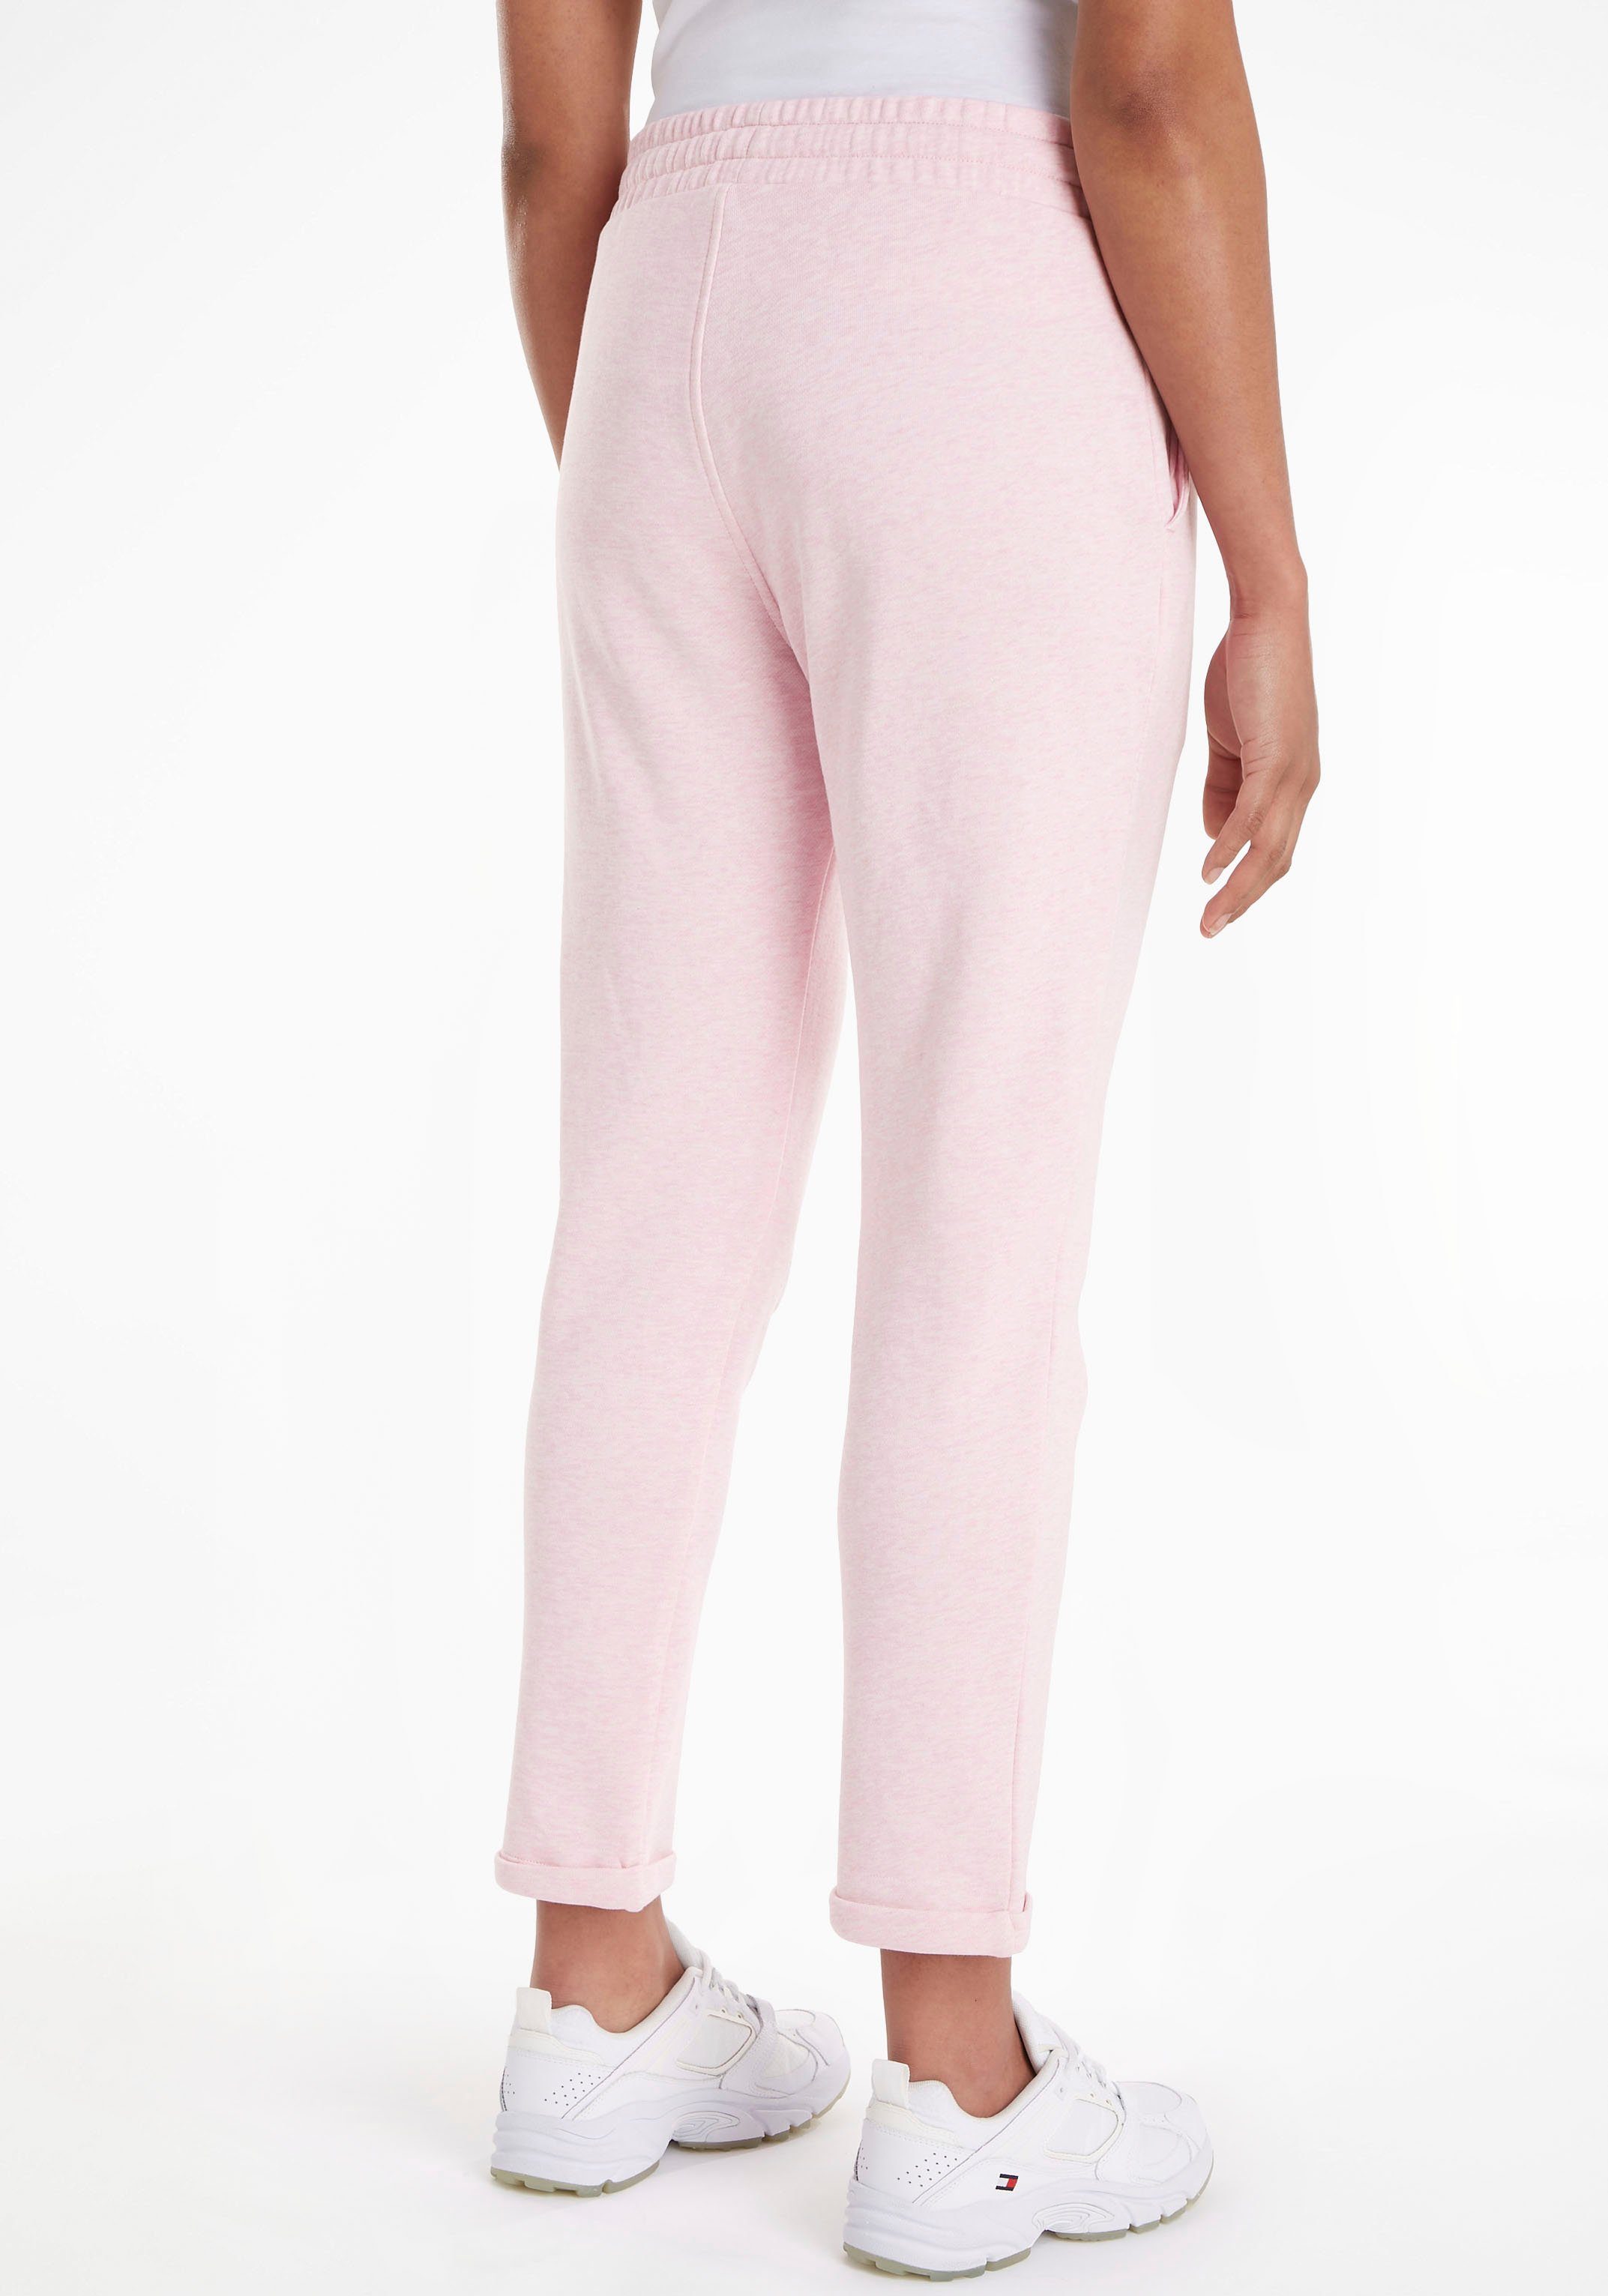 SWEATPANTS TAPERED mit Markenlabel Classic-Pink-Heather ROUNDALL Hilfiger Tommy Sweatpants Tommy NYC Hilfiger